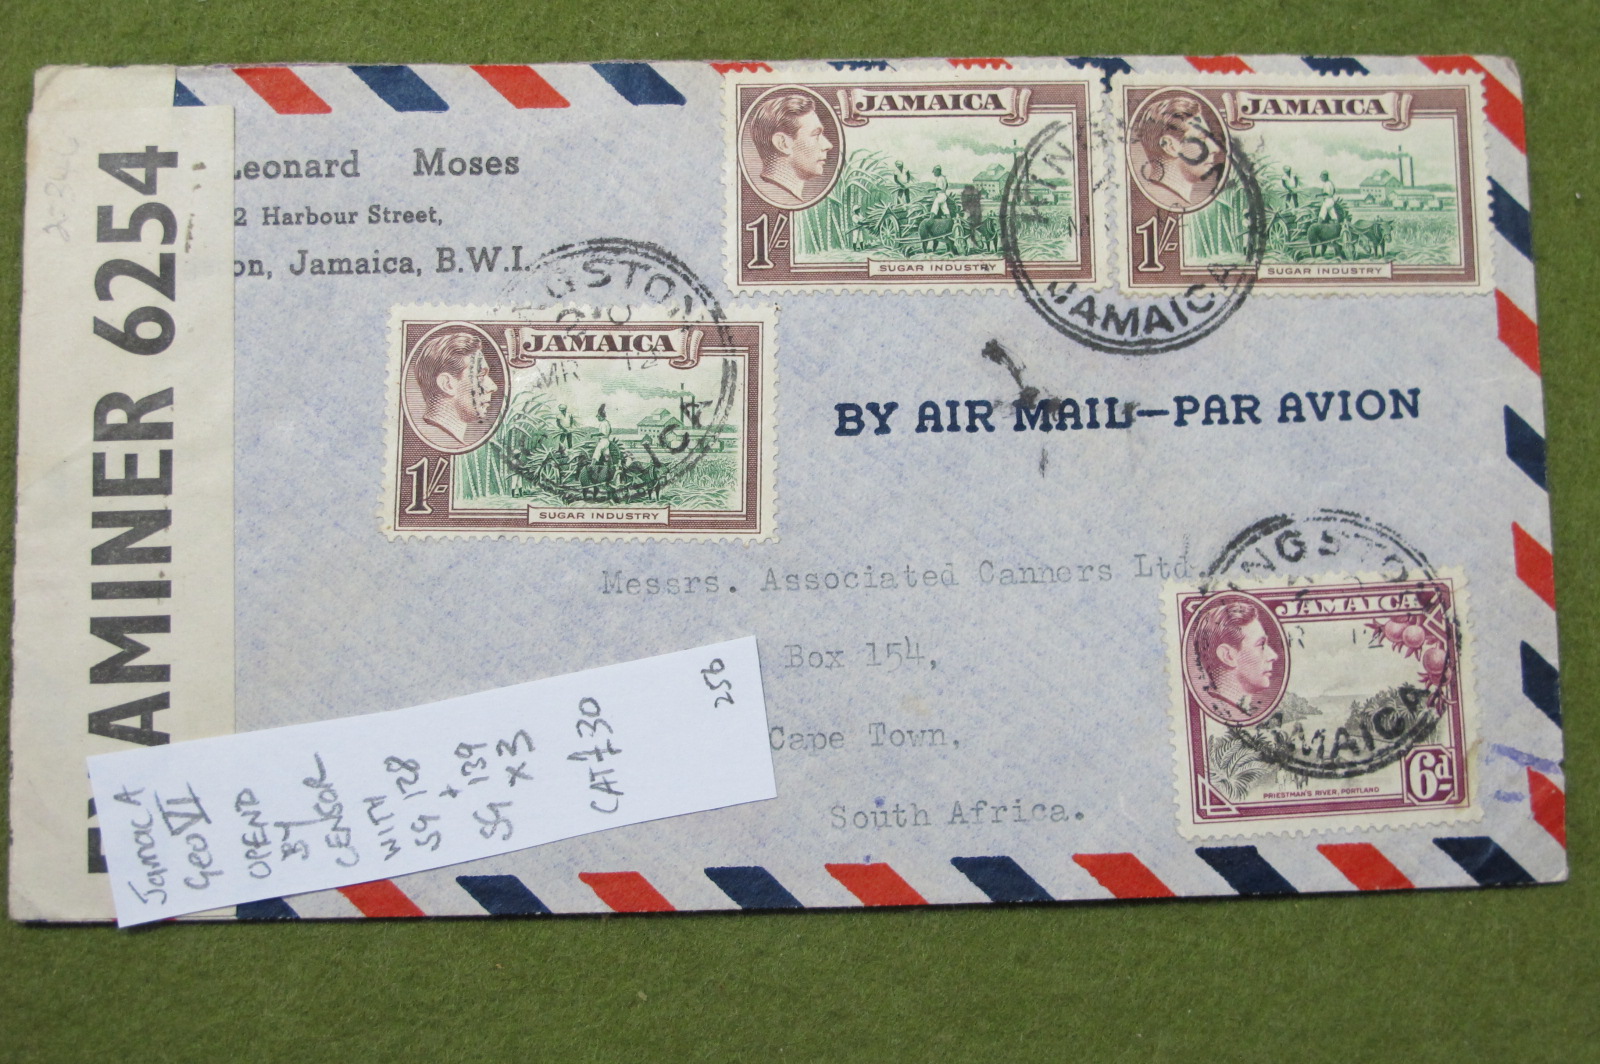 Jamaica Opened By Censor Cover With King George VI SG 128 and SG 139 (3), very good condition.